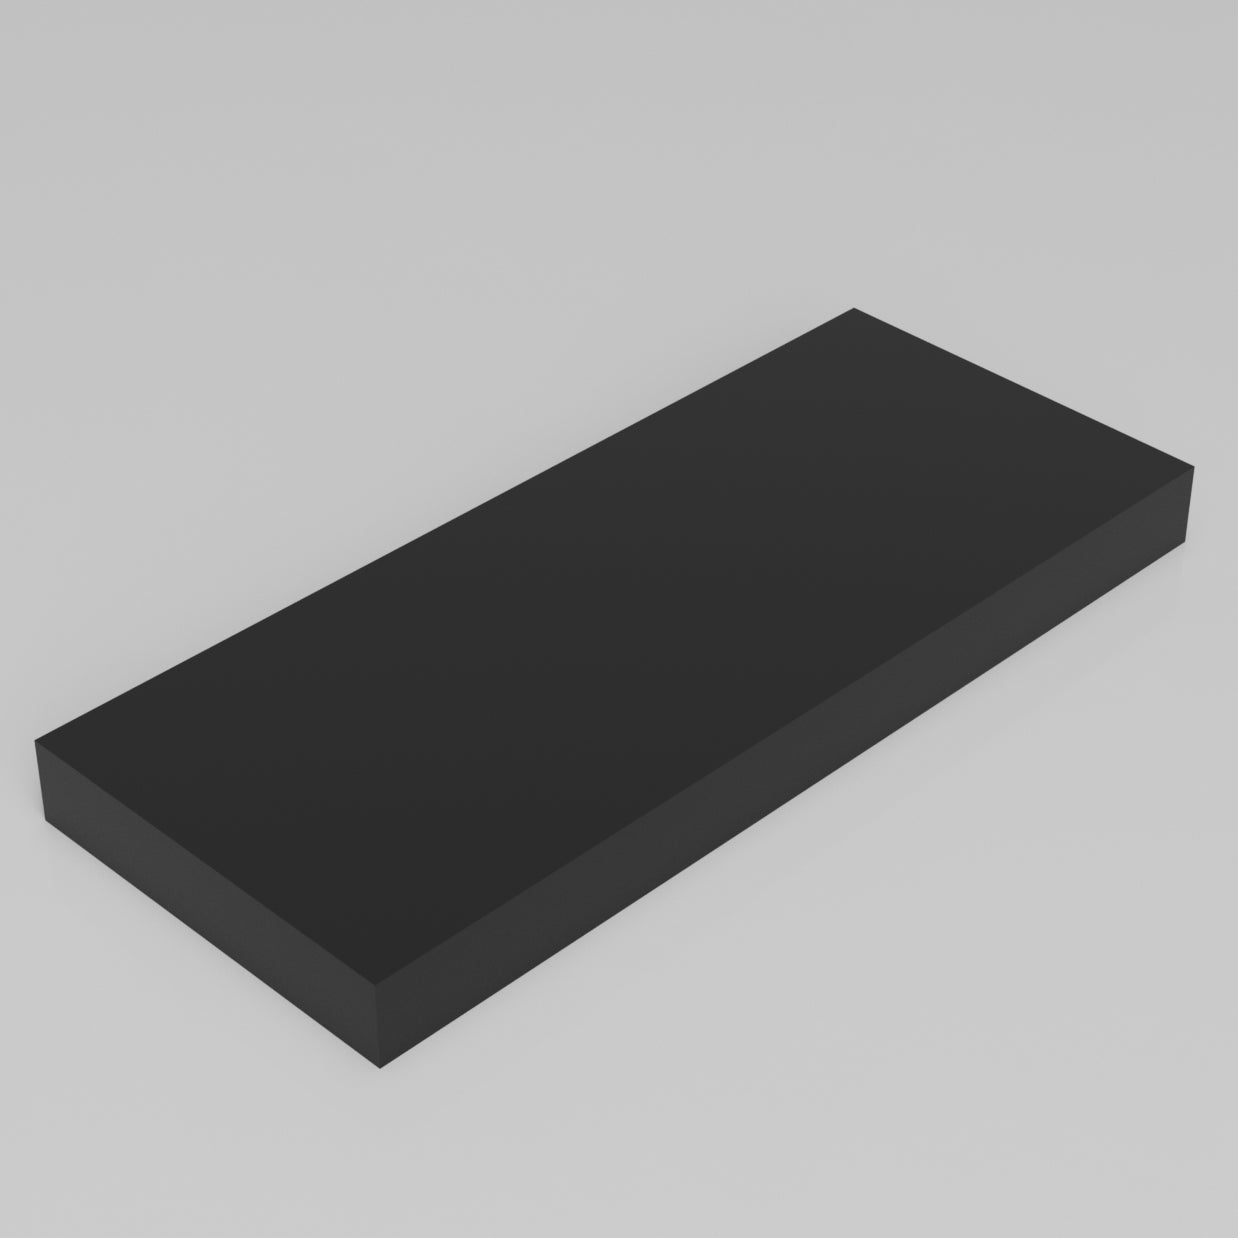 Machinable Wax Rectangular Block Front View 1 Inch by 5 Inch by 12 Inch